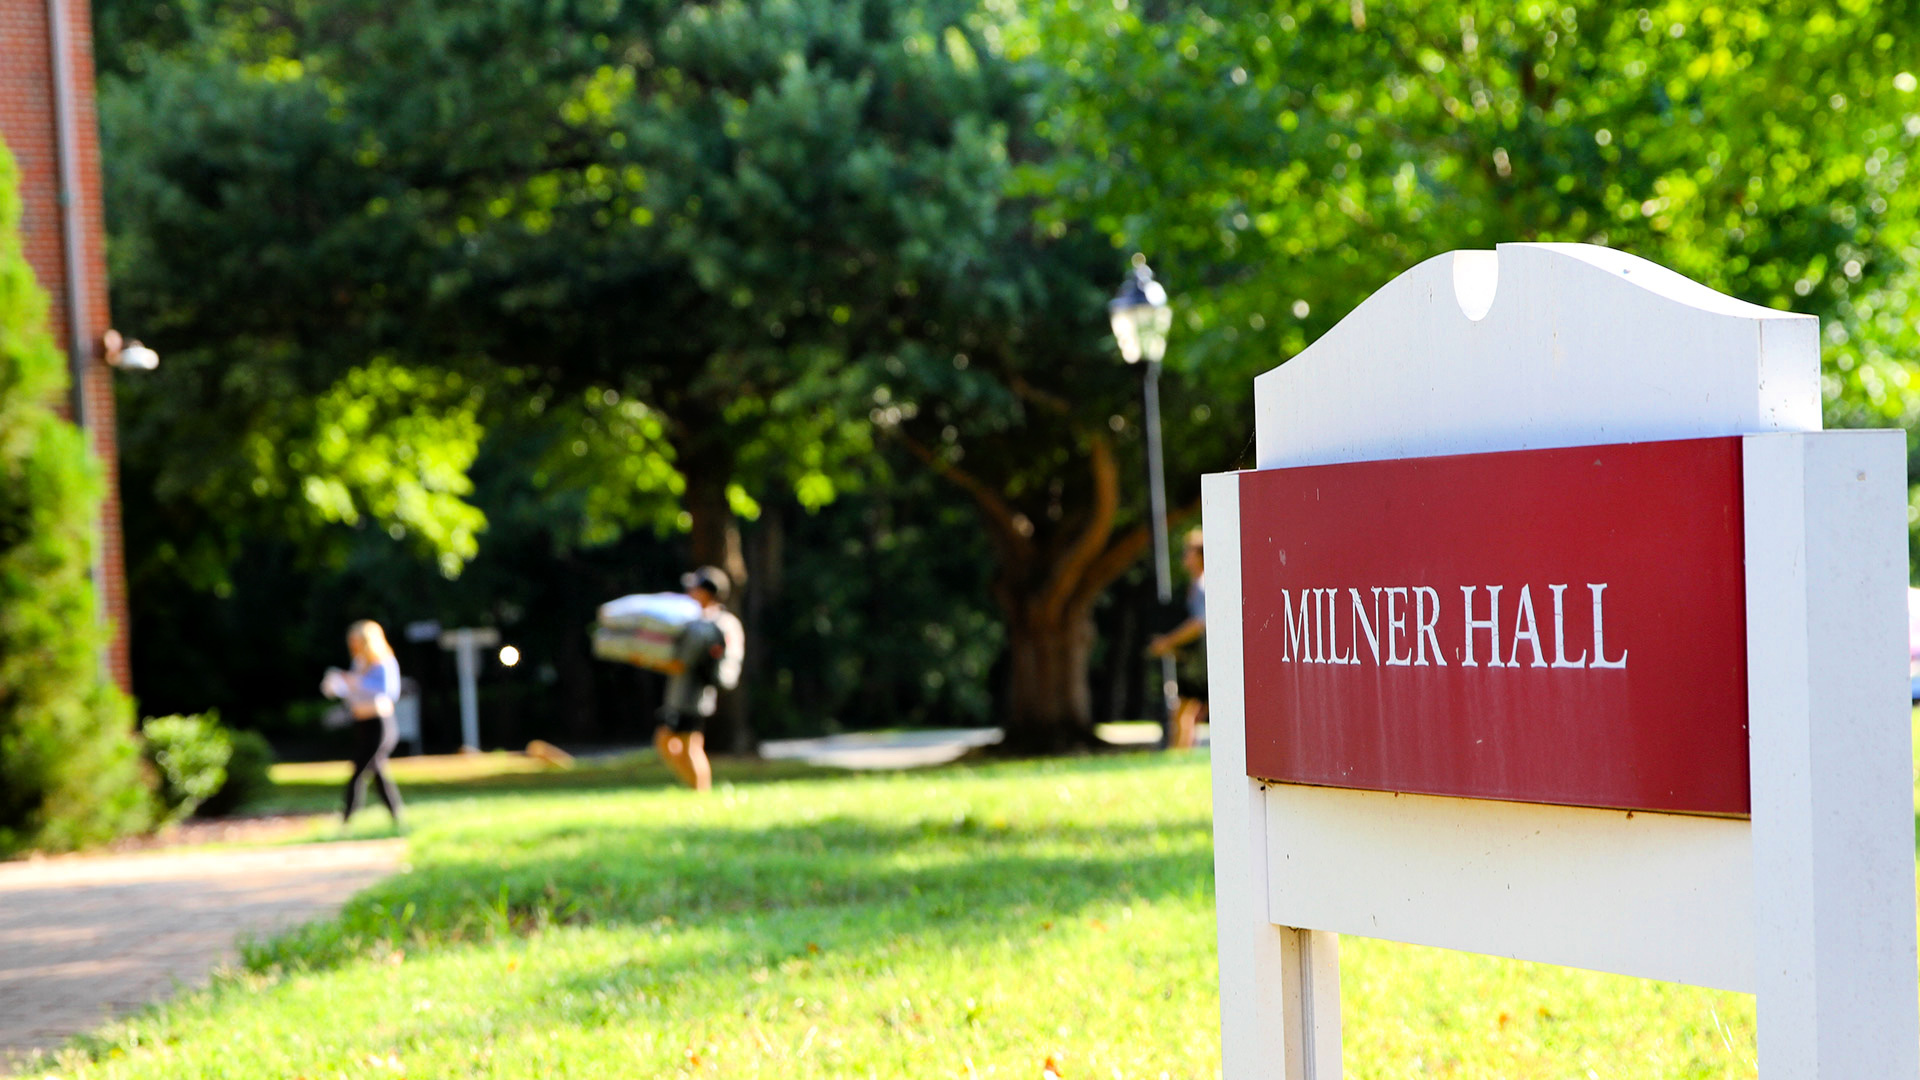 A student and friend carry items into Milner Hall, a first-year residence hall, behind the building sign.